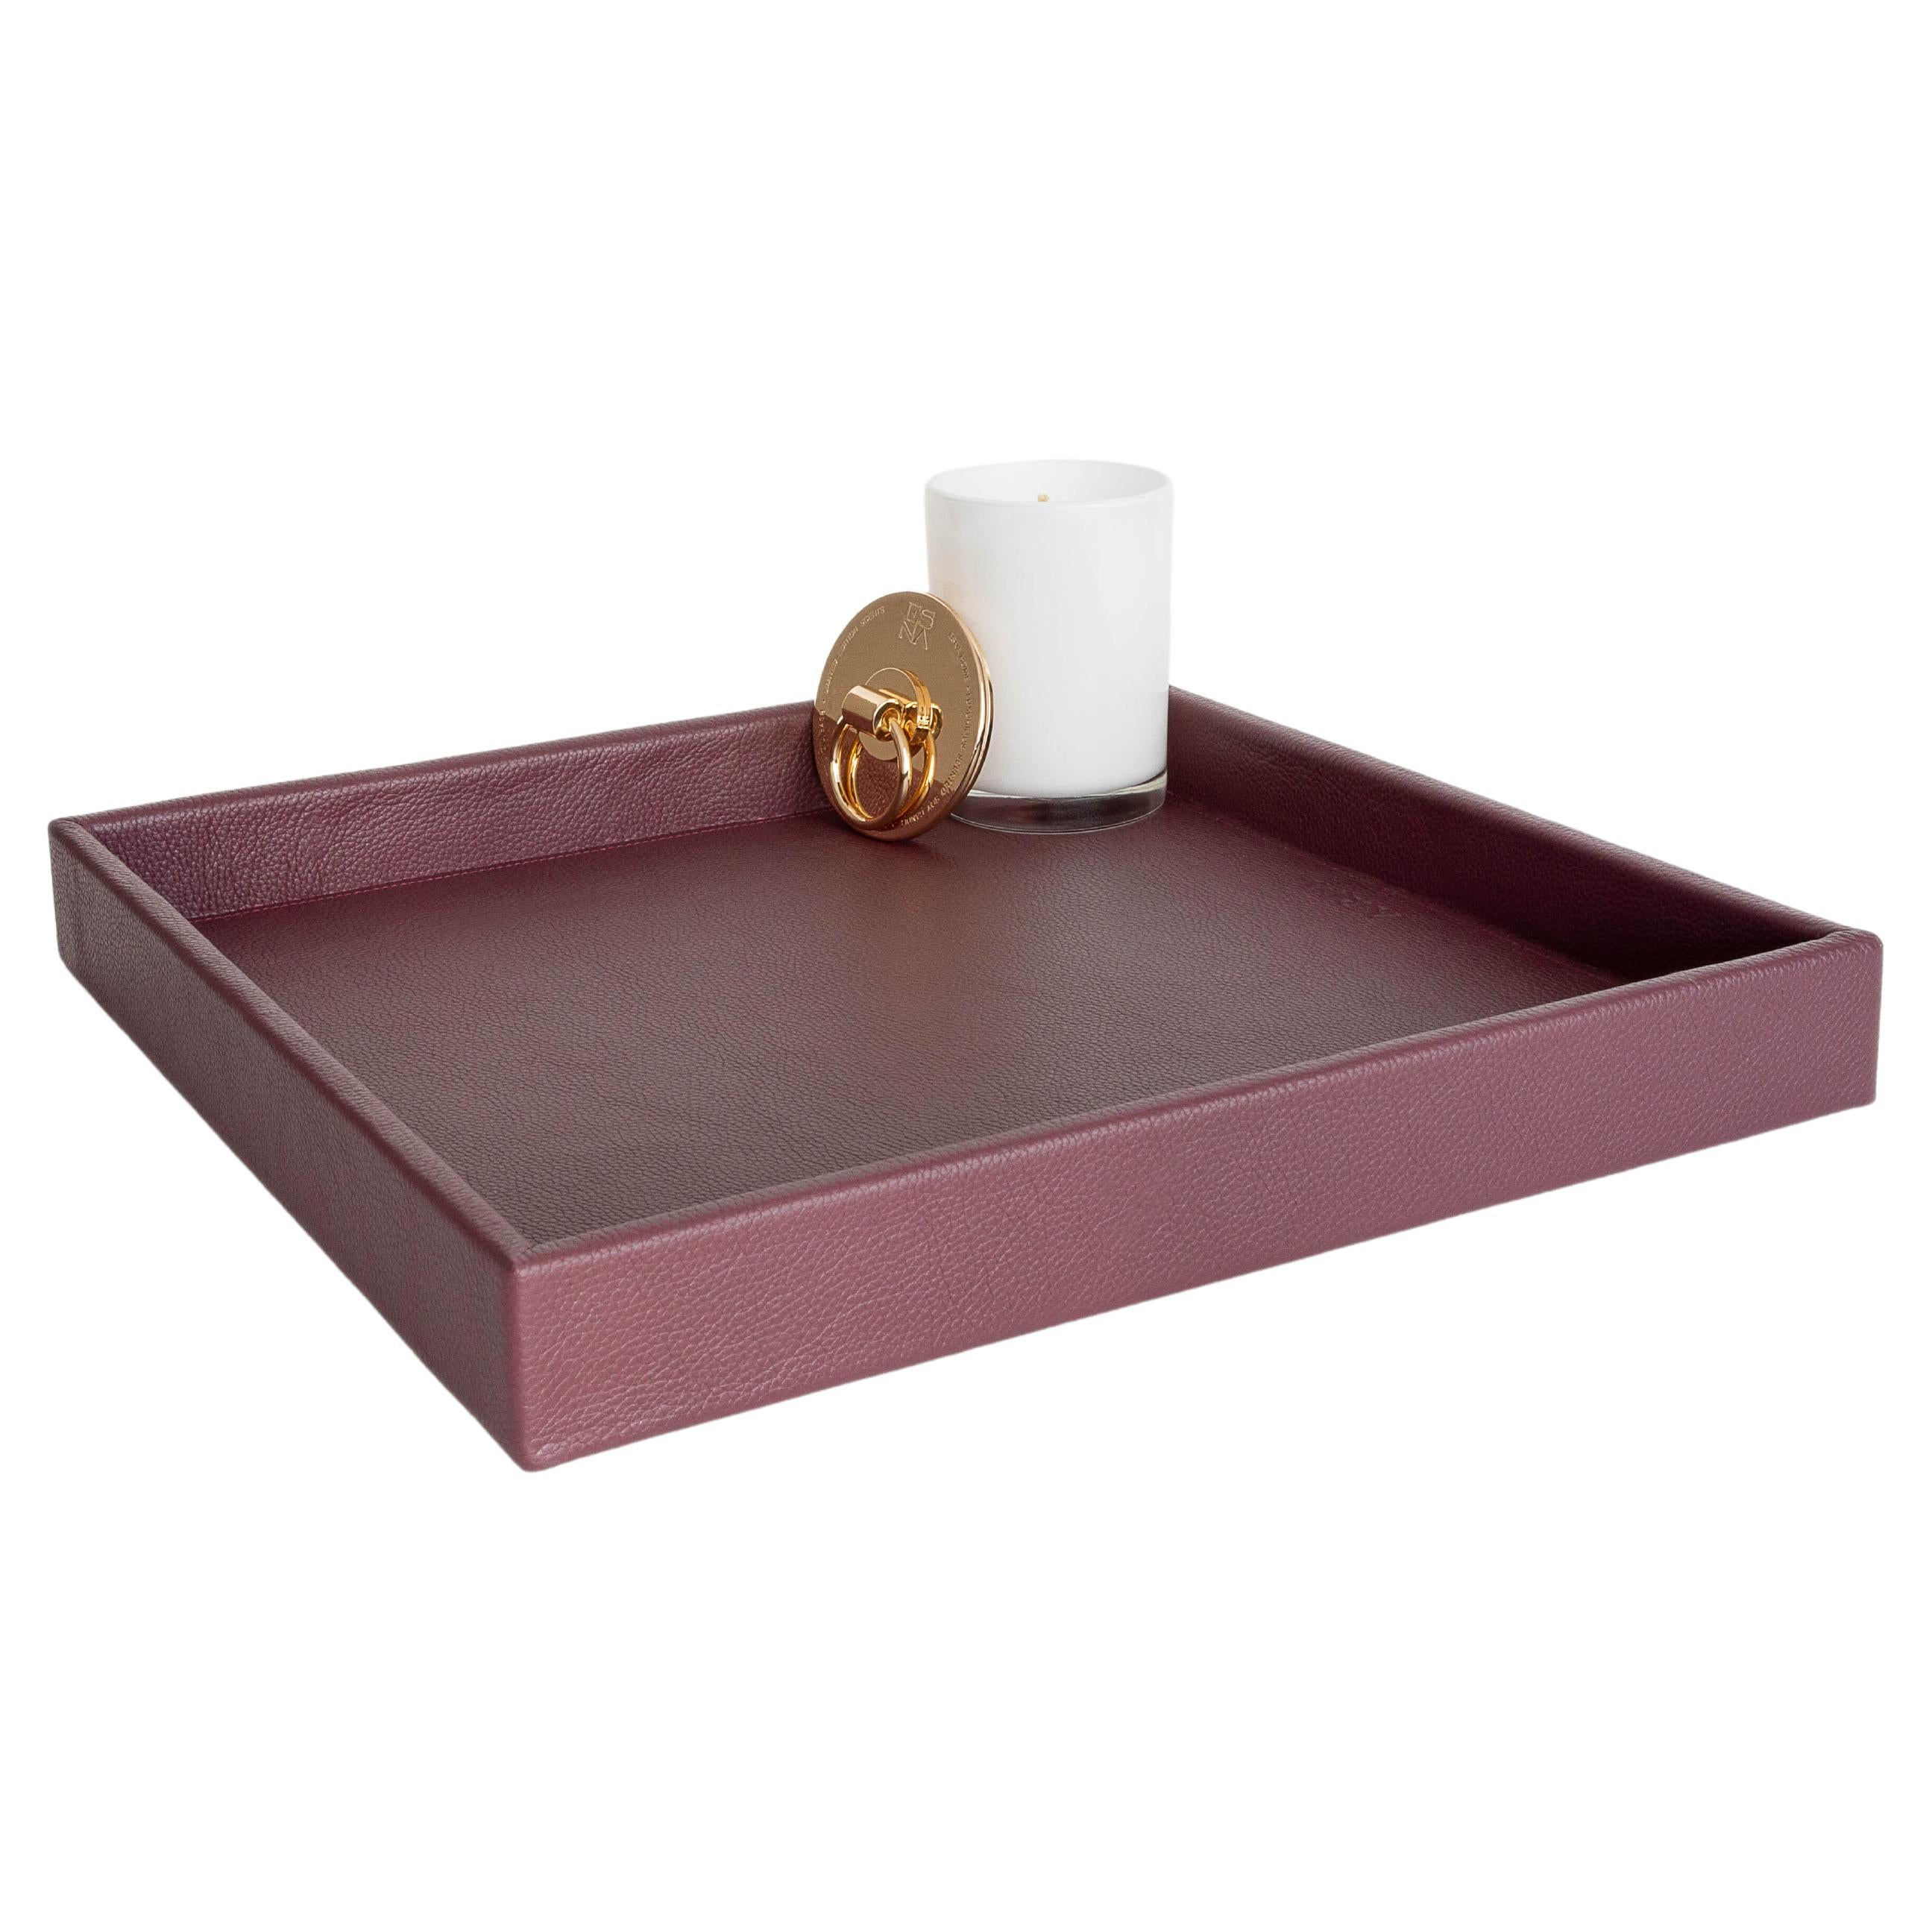 Leather Tray, Large A Square Tray, Handmade in Brazil - Color: Wine